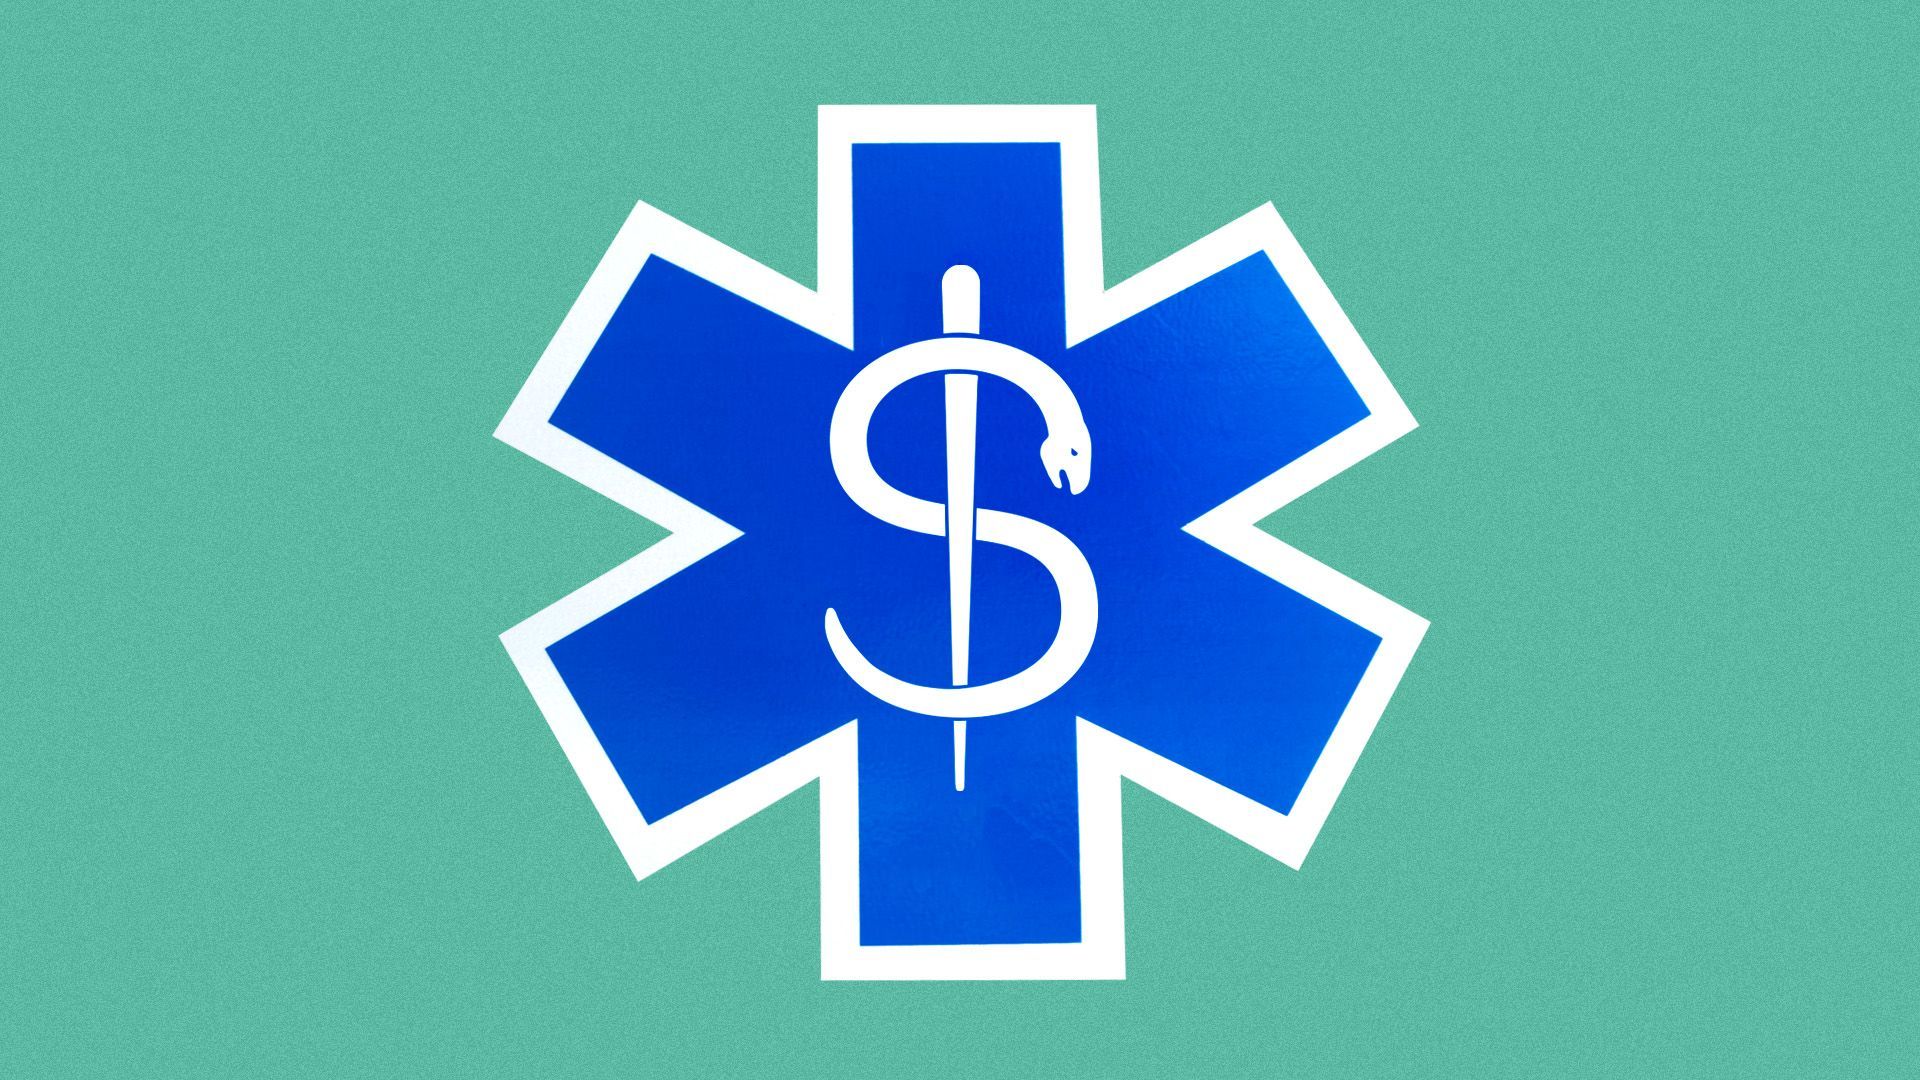 Illustration of a an ambulance star-of-life symbol with the caduceus replaced by a dollar sign